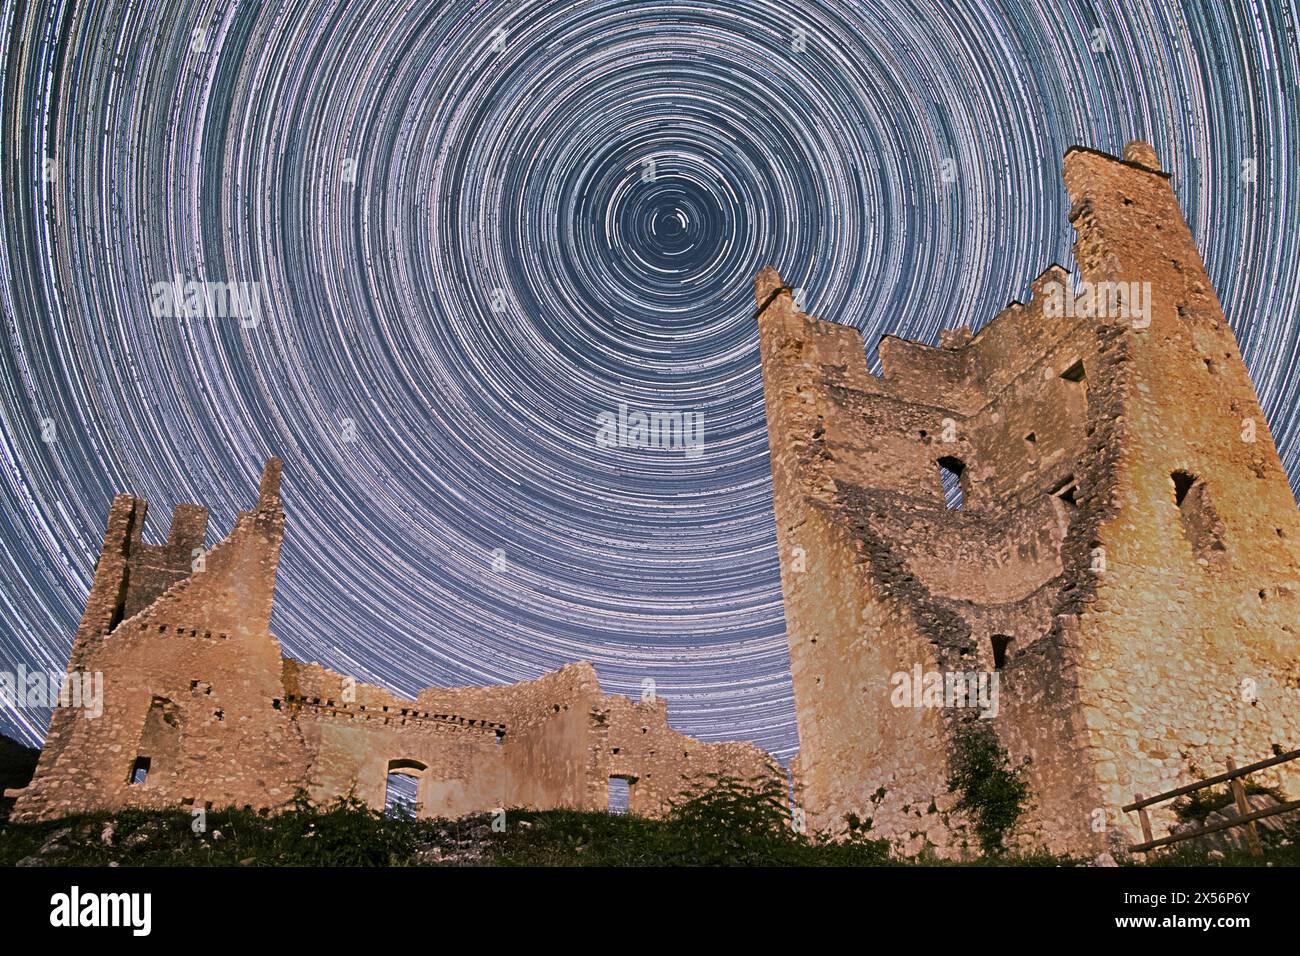 Star wheel of polaris north star and 12th century French castle ruins Stock Photo